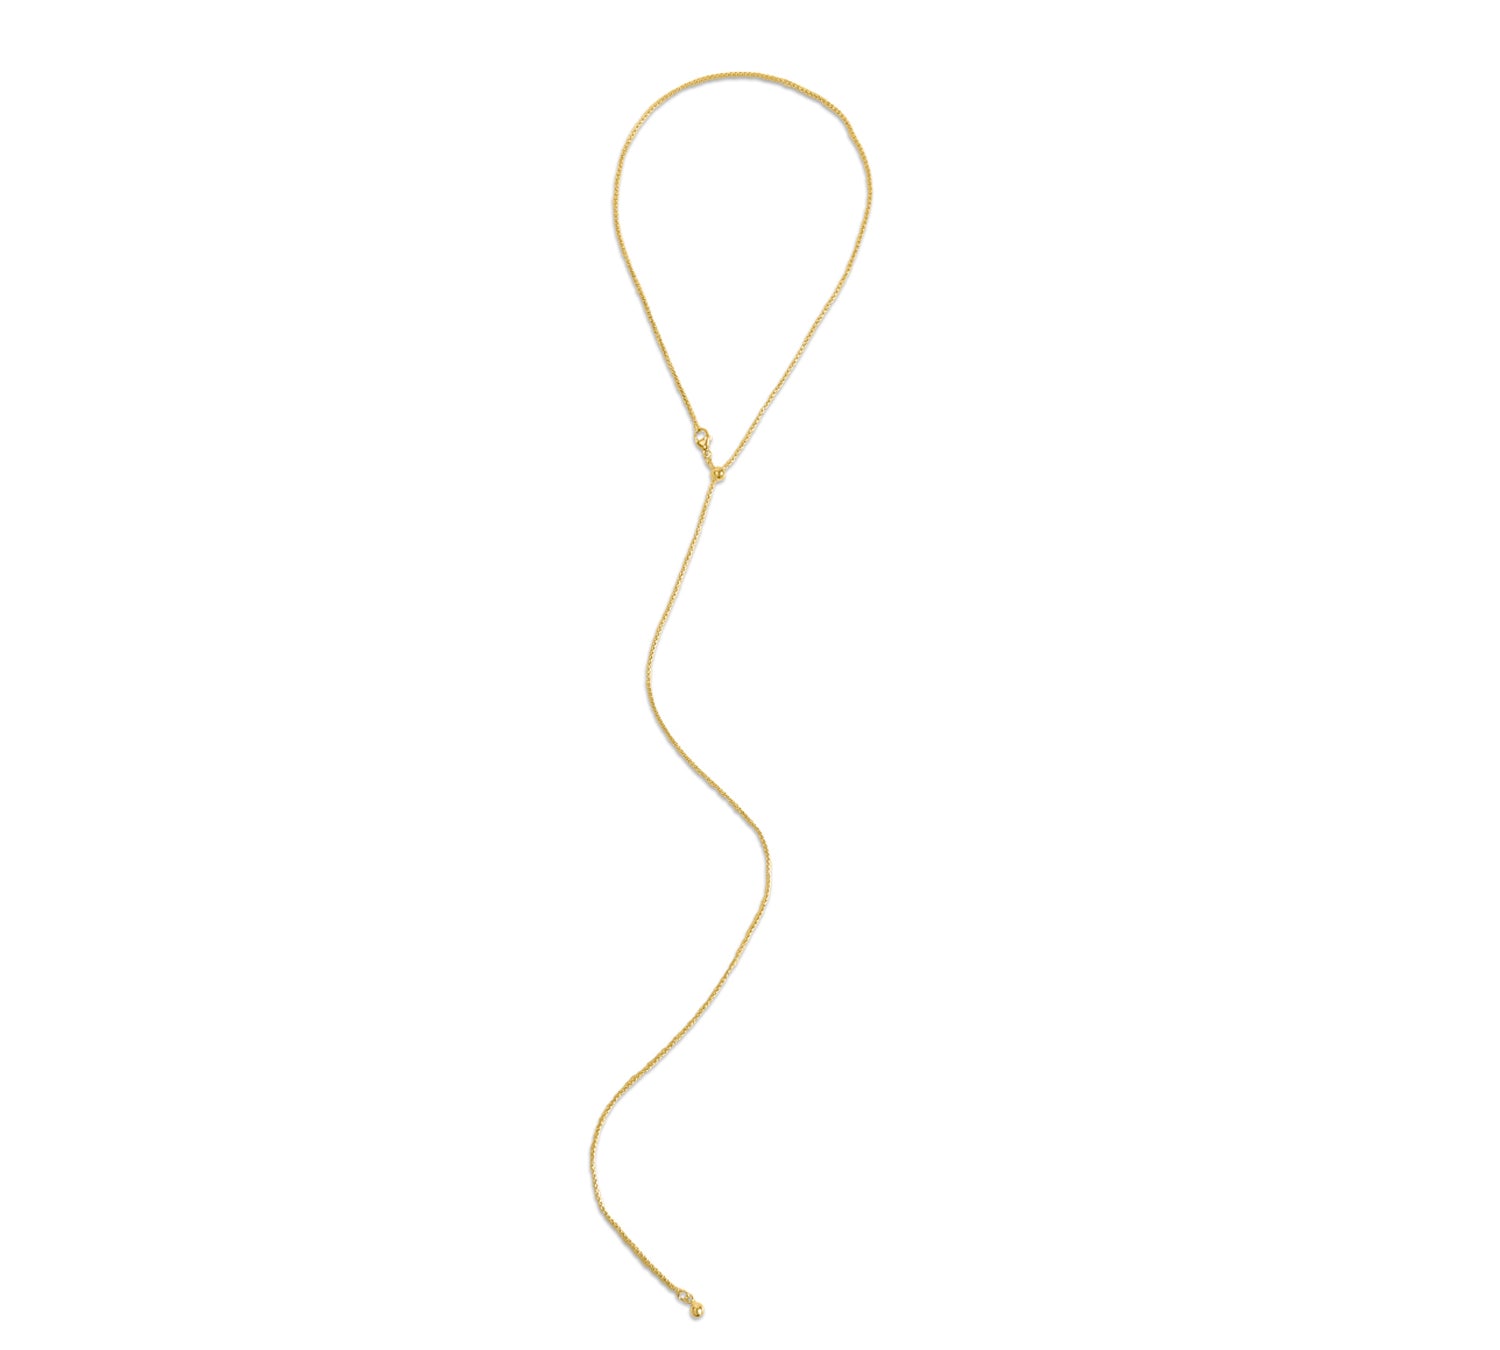 Adjustable 14K Gold-Filled Box Chain Necklace-nunchi